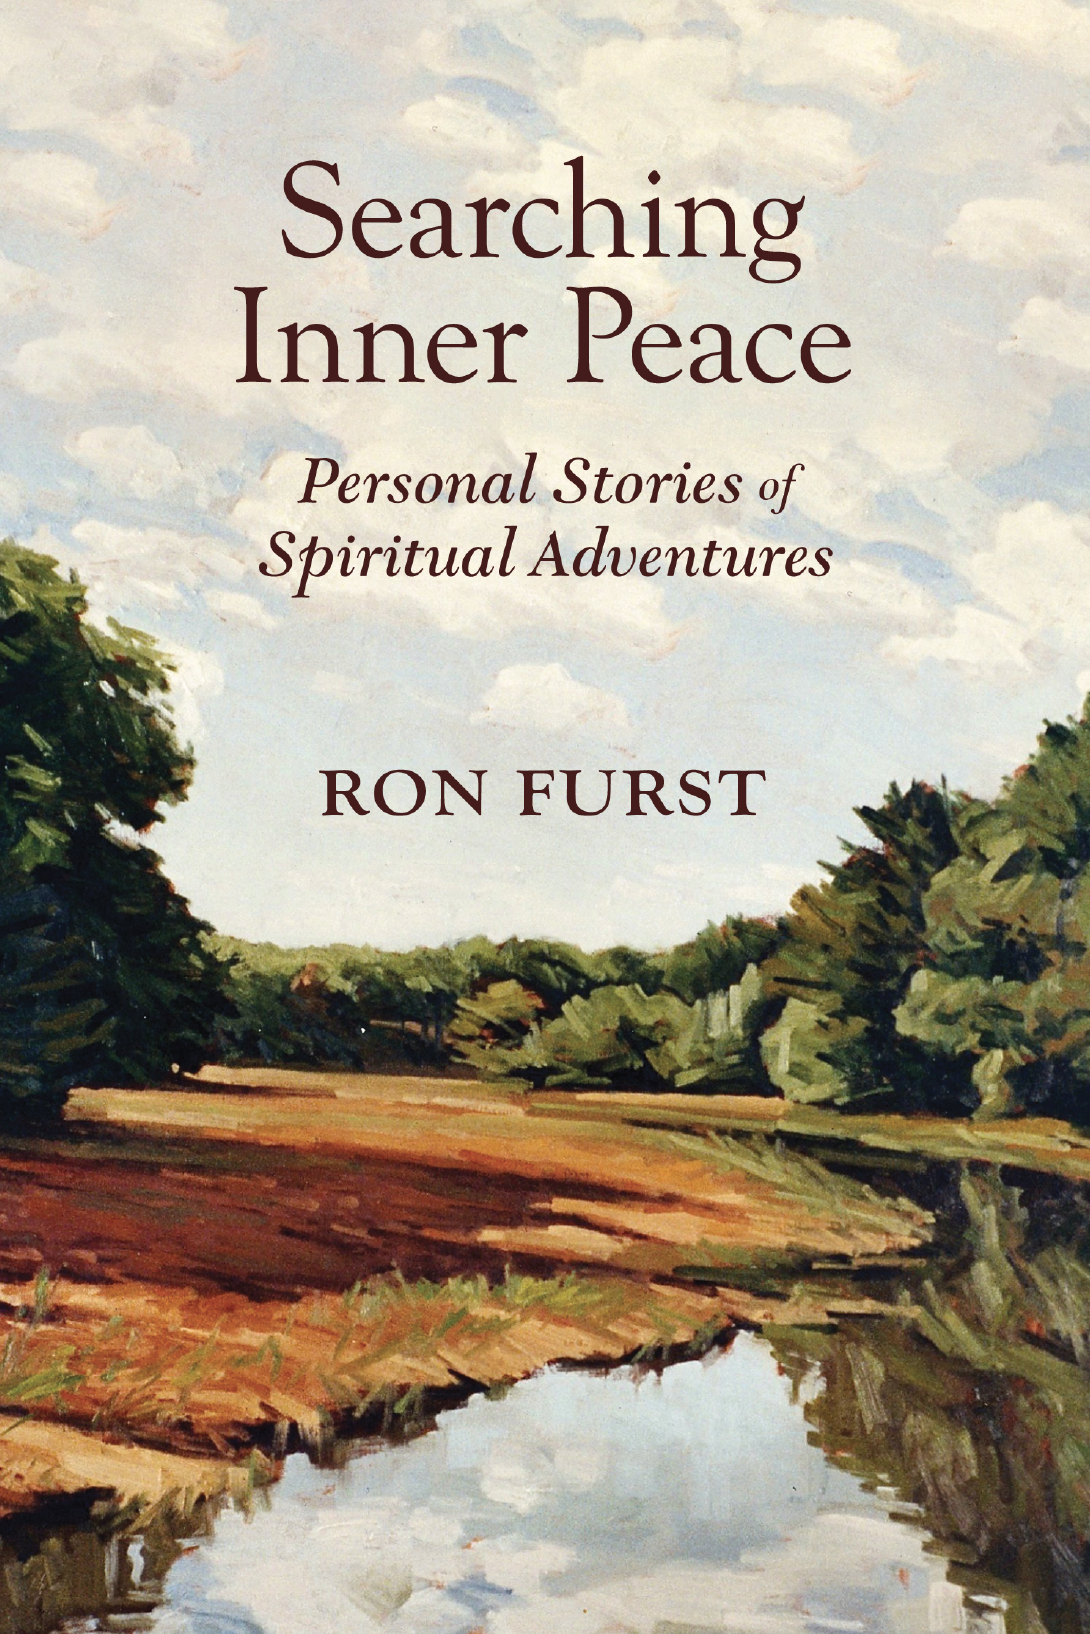 Searching Inner Peace by Ron Furst